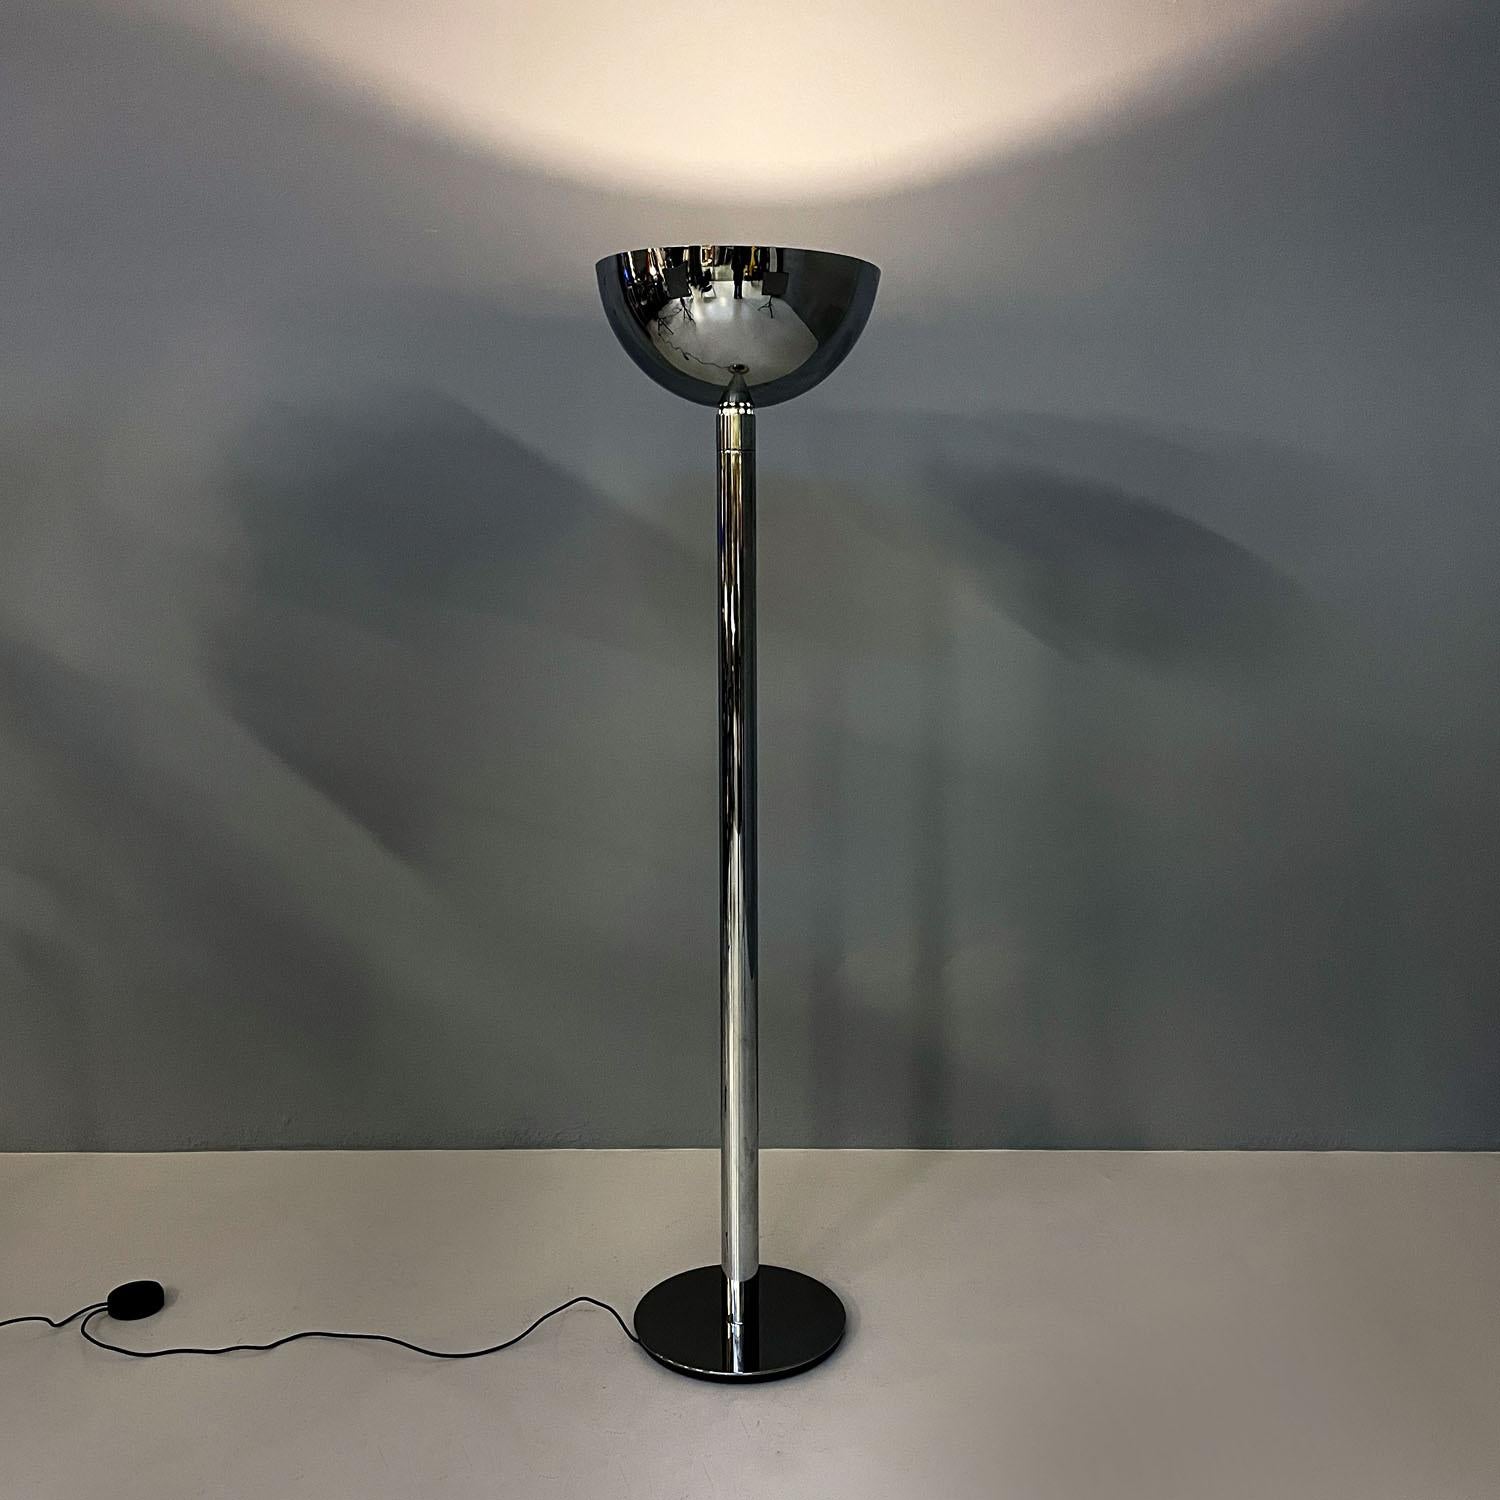 Italian floor lamp AM2Z by Franco Albini and Franca Helg for Nemo Lighting, 2024
Floor lamp mod. AM2Z round base. The structure is entirely made of chromed metal. The diffuser has an inverted dome with a white lacquered interior, just below there is